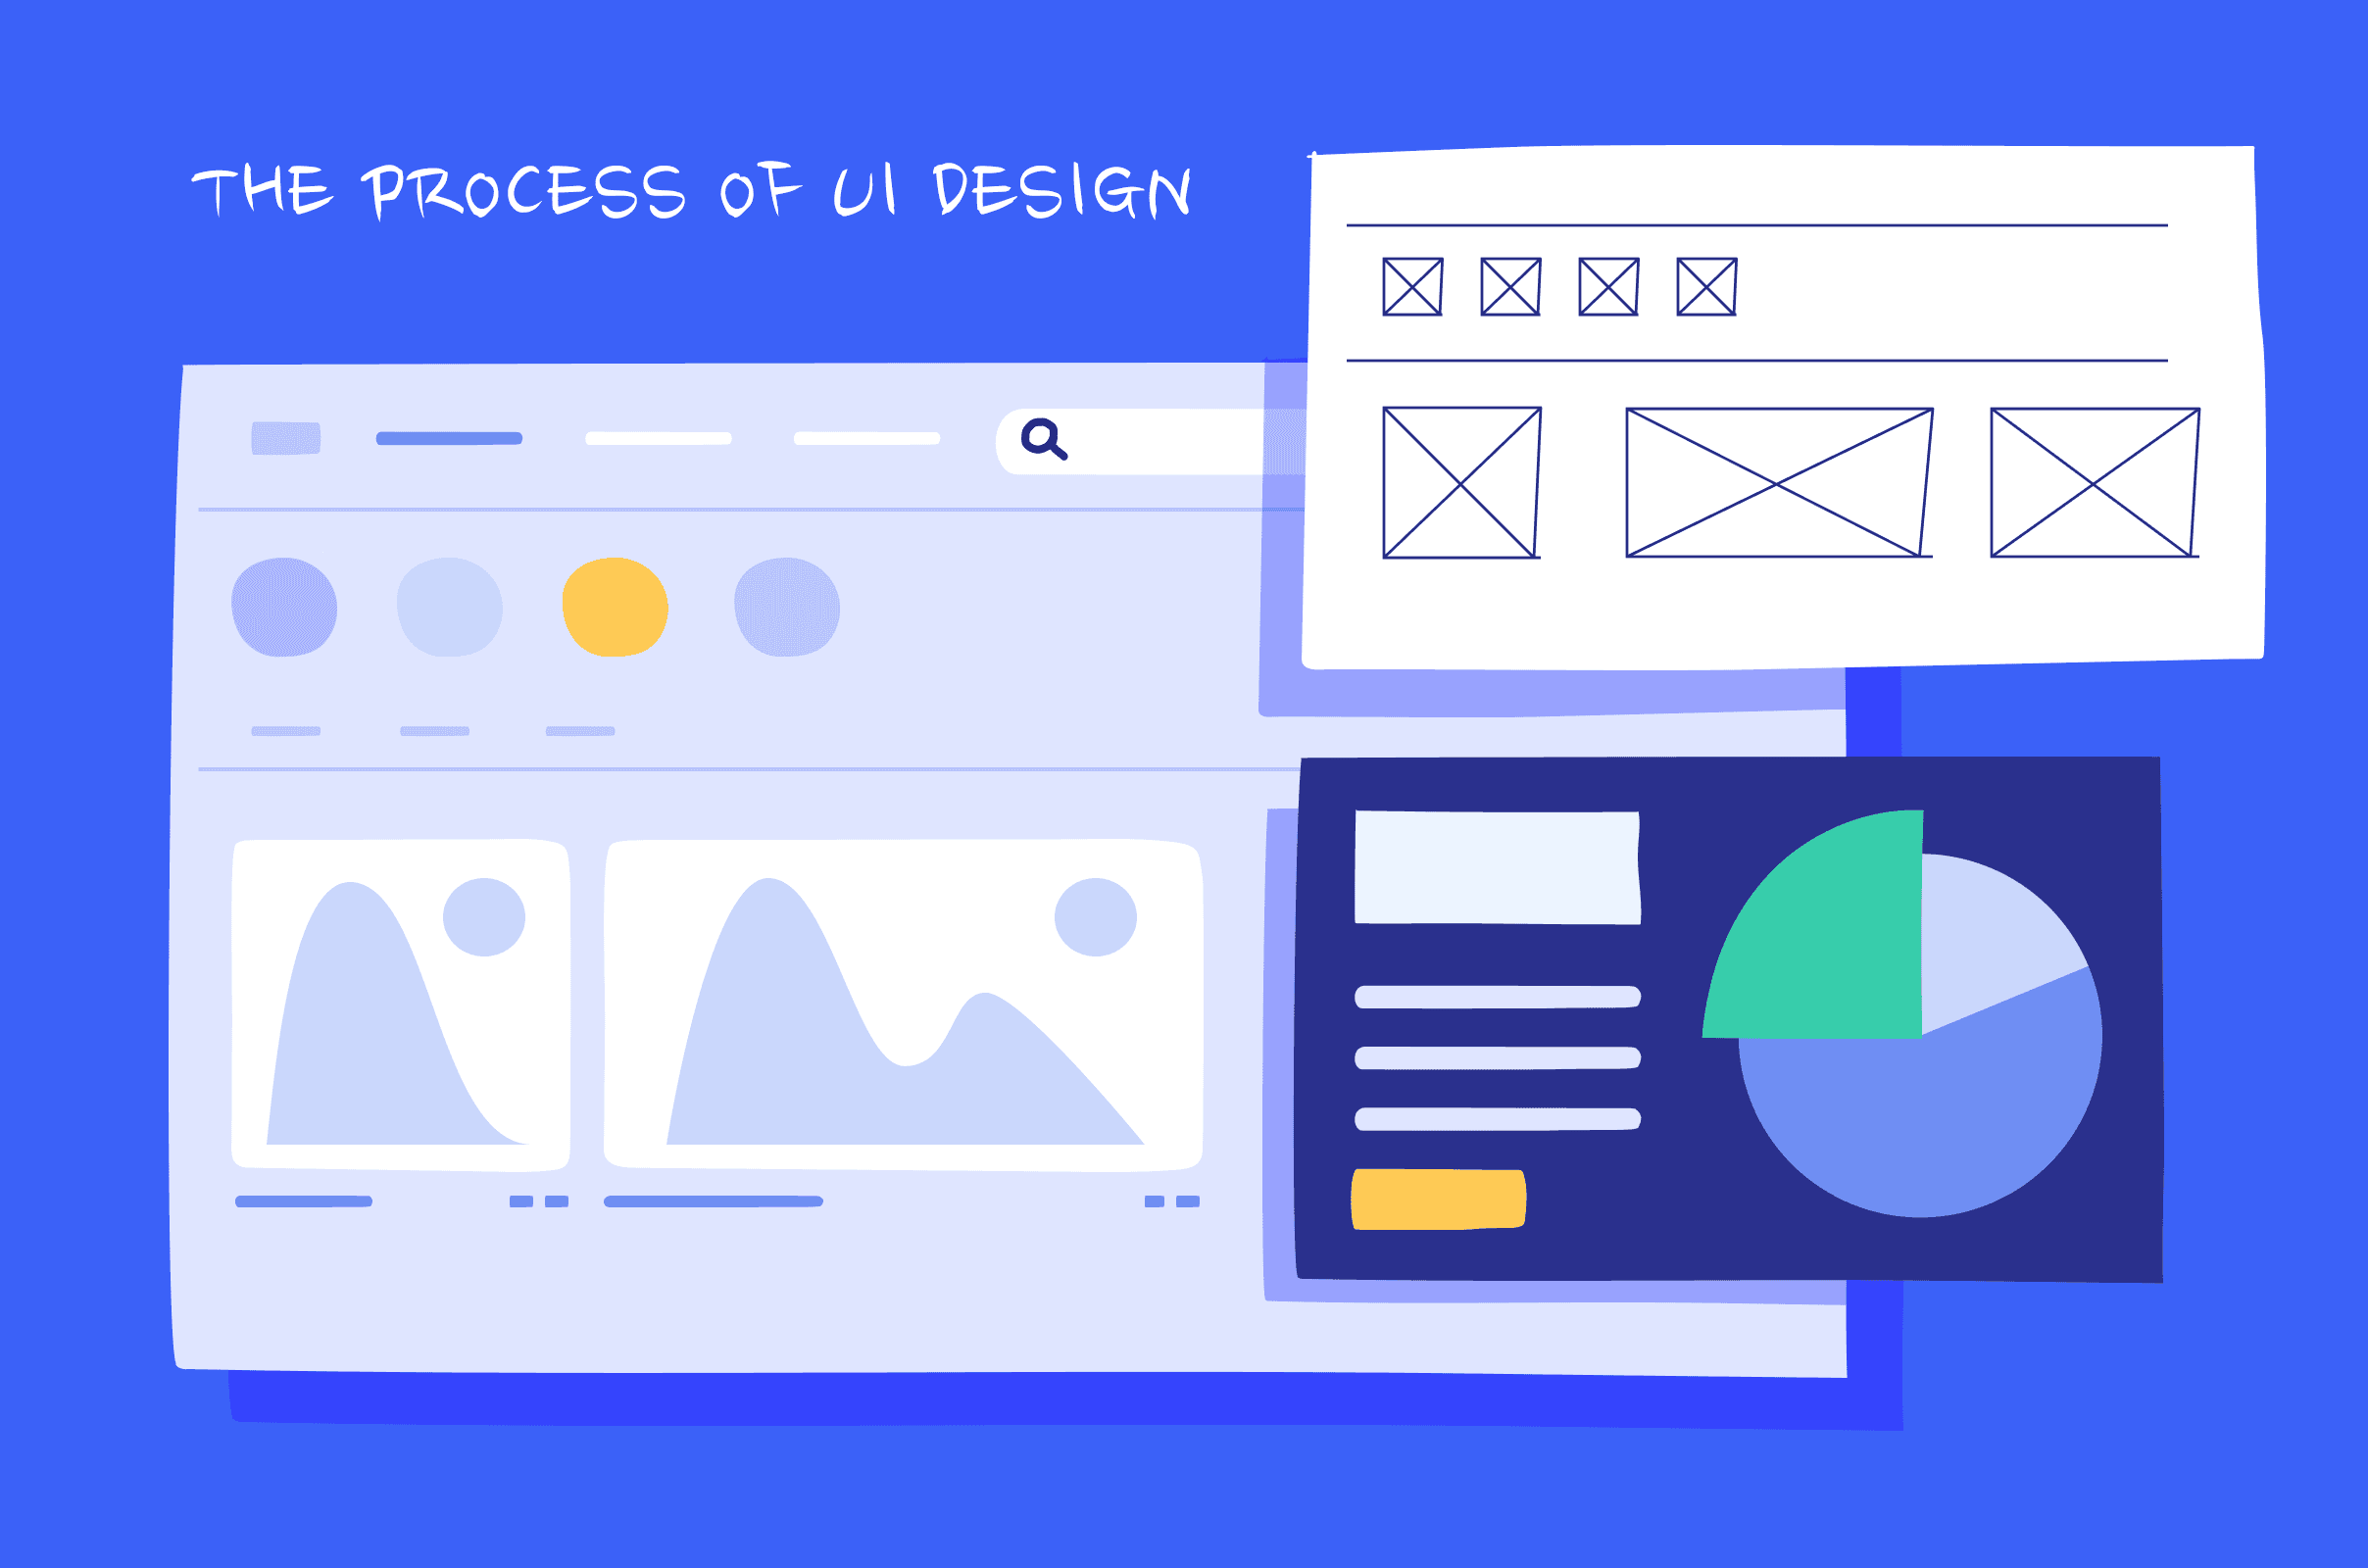 The process of UI design: the key steps to a successful UI design